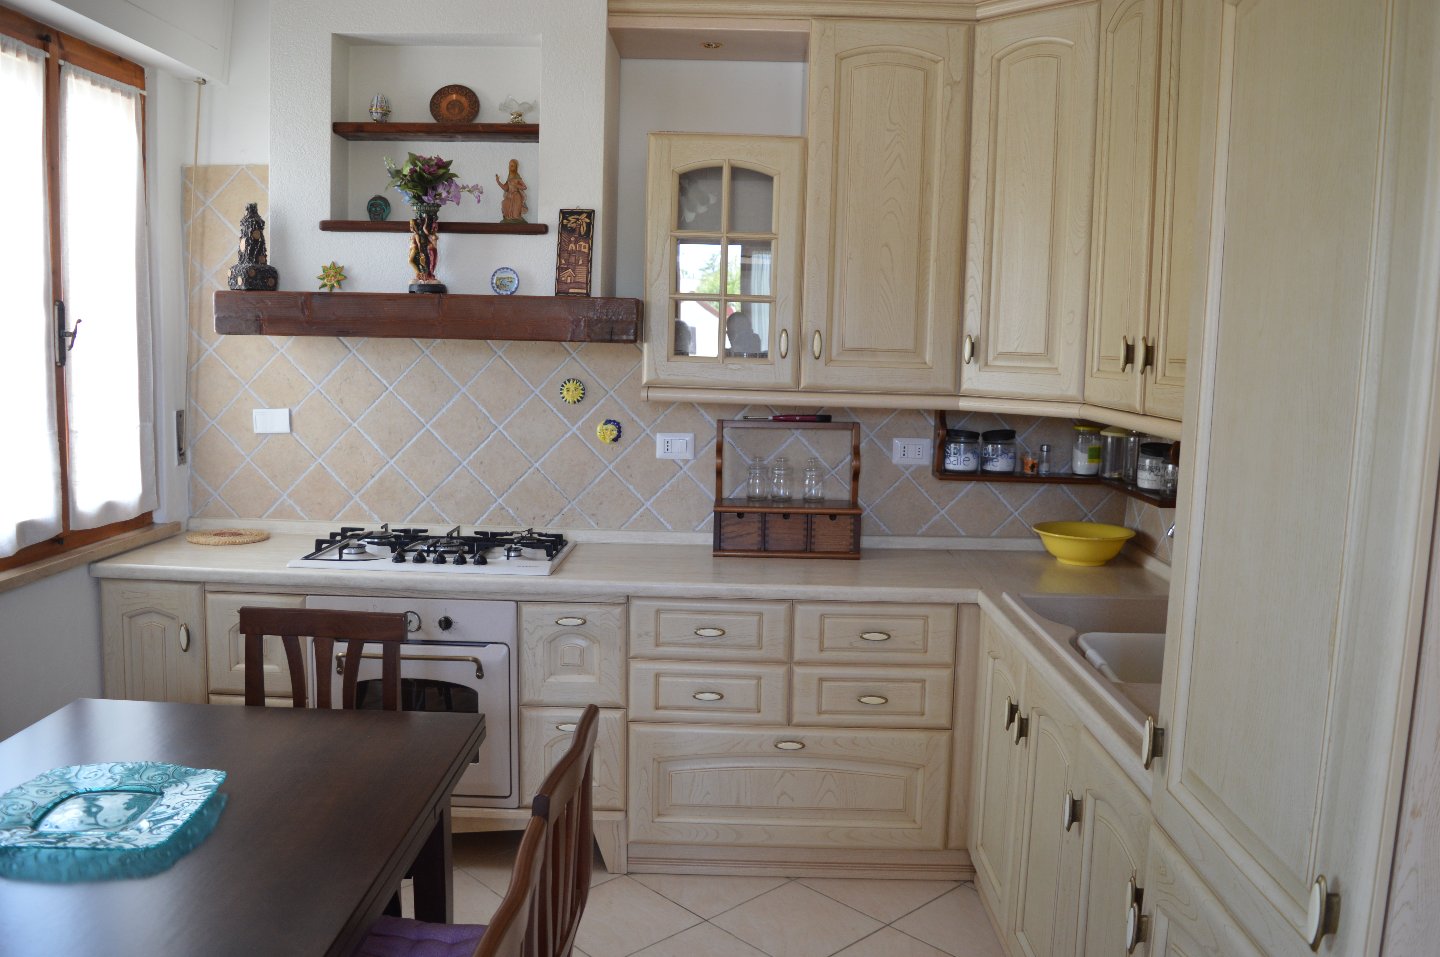 Four-family cottage for sale in Cecina (LI)